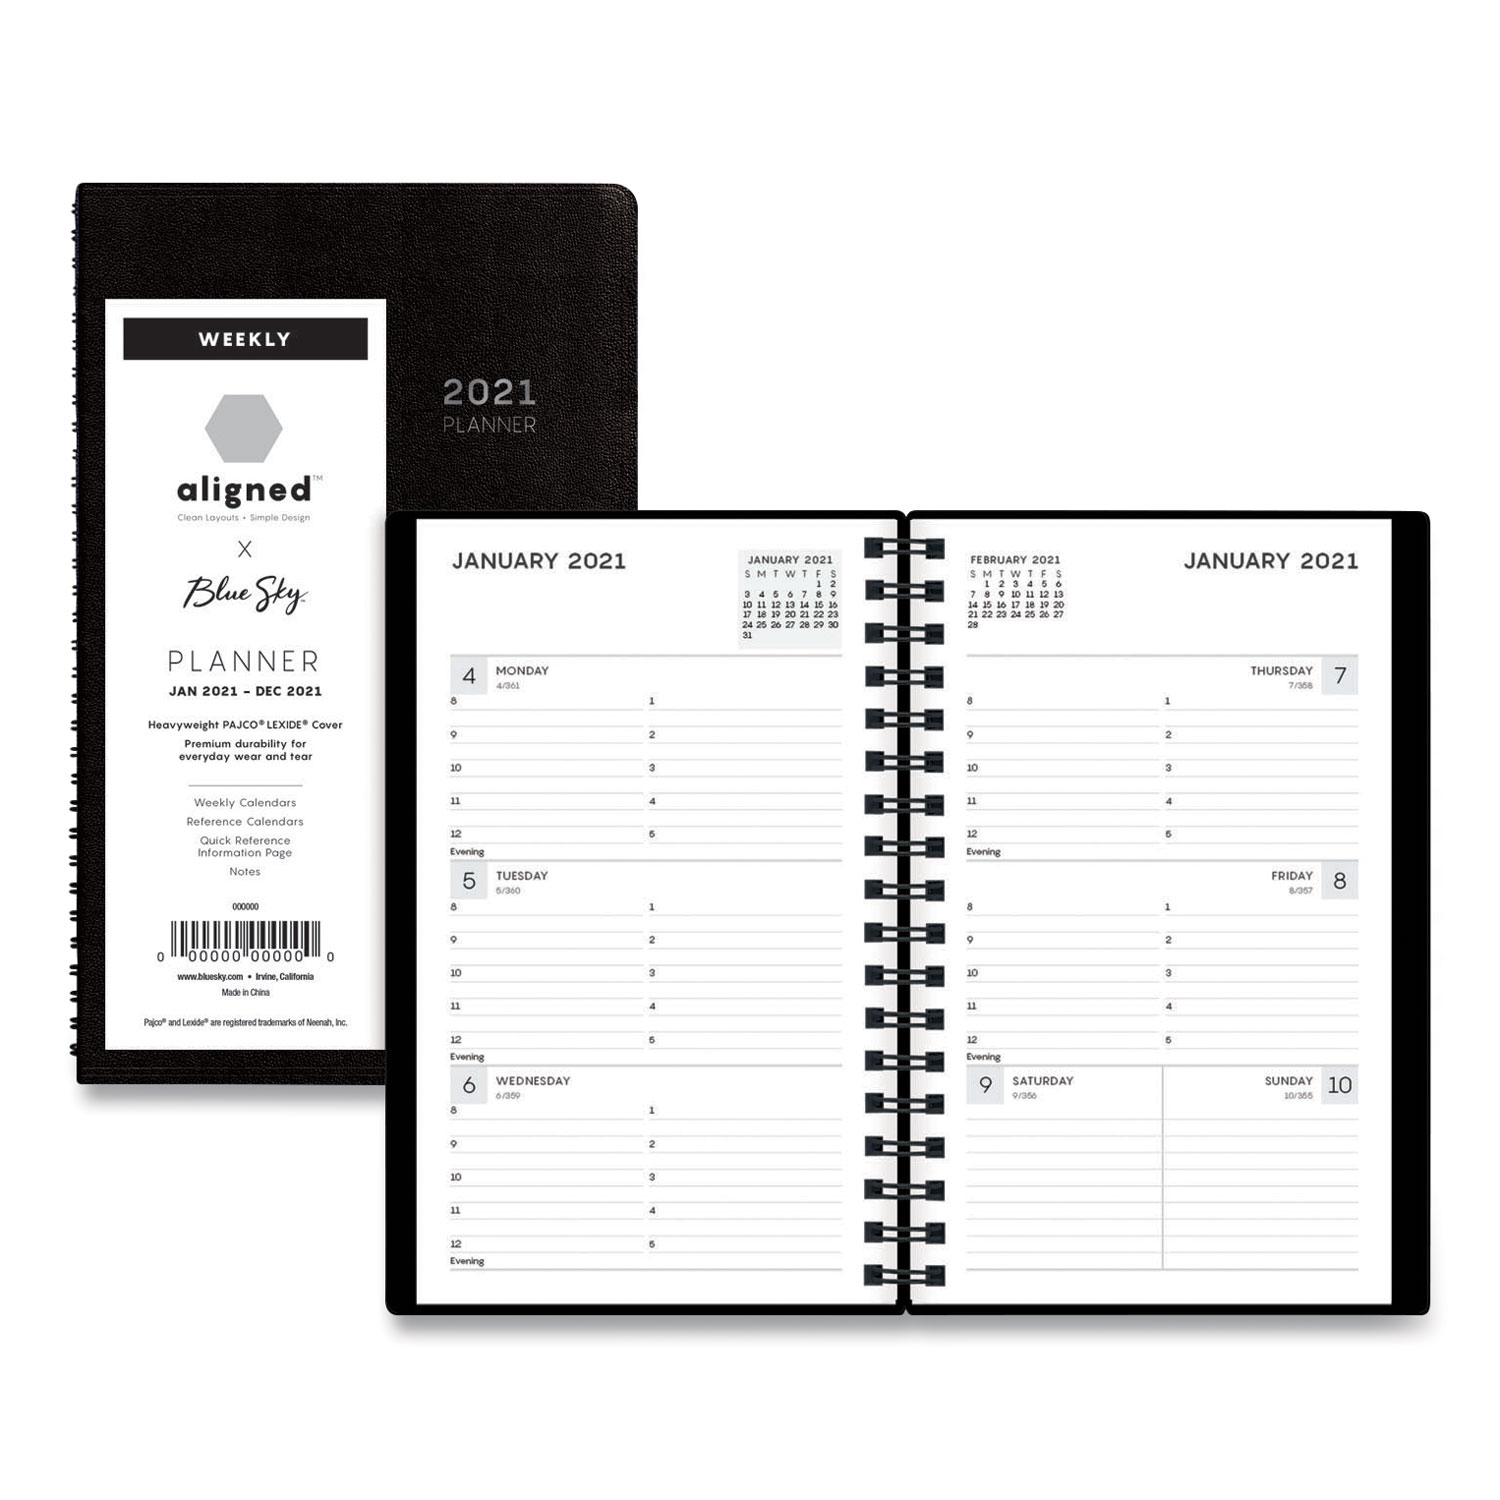 Blue Sky® Aligned Weekly Contacts Planner, 6 x 3.5, Black, 2021